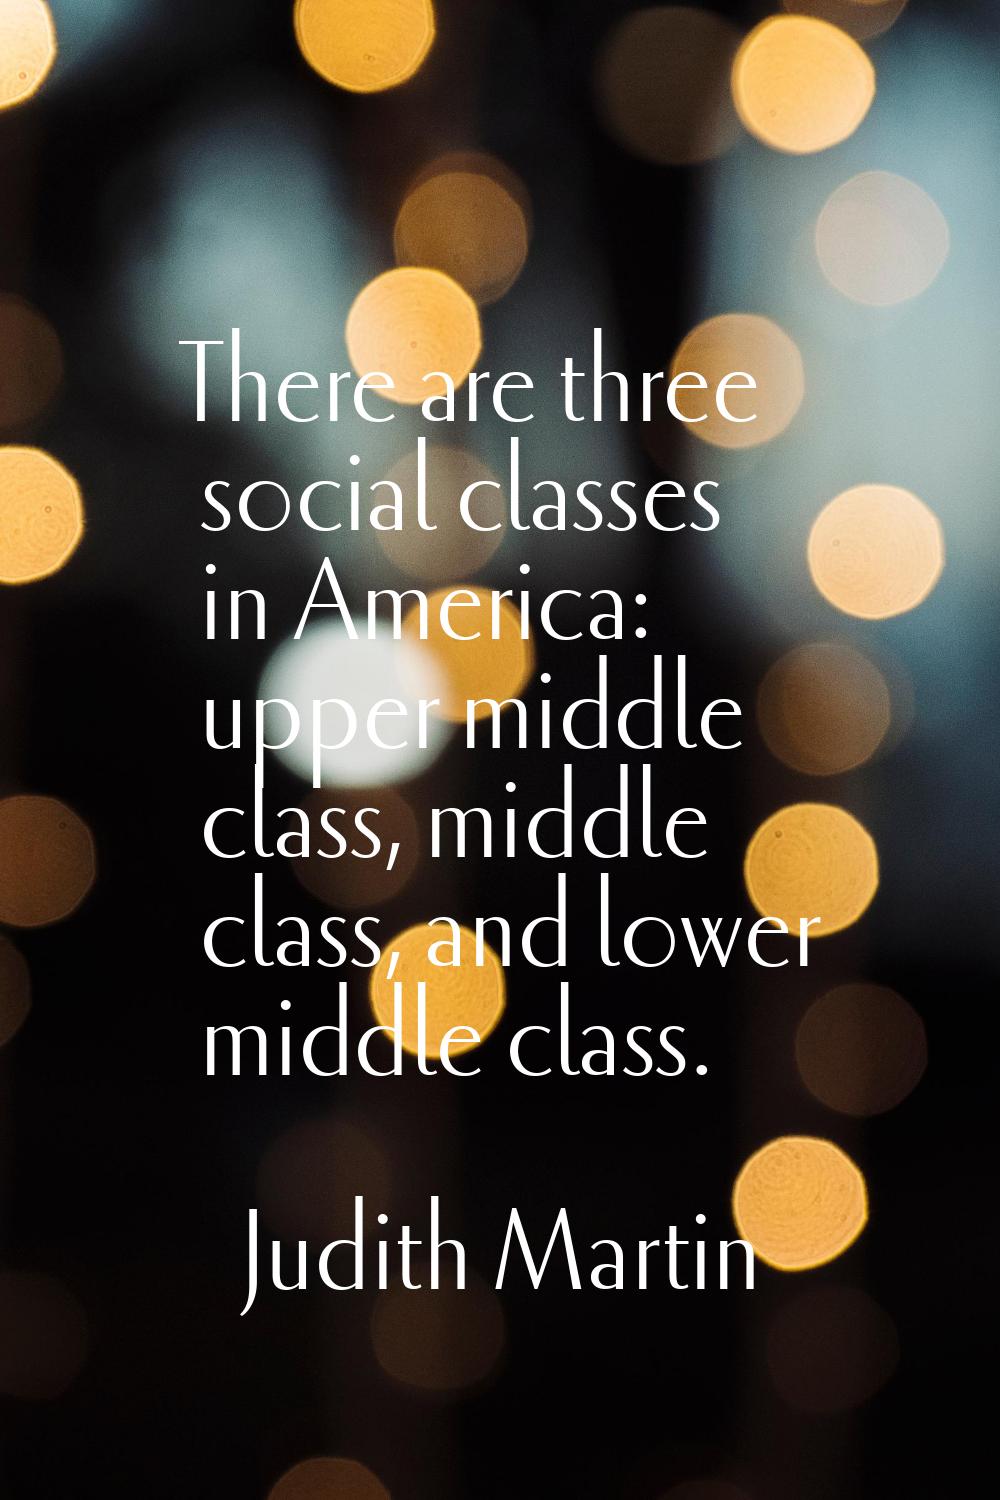 There are three social classes in America: upper middle class, middle class, and lower middle class